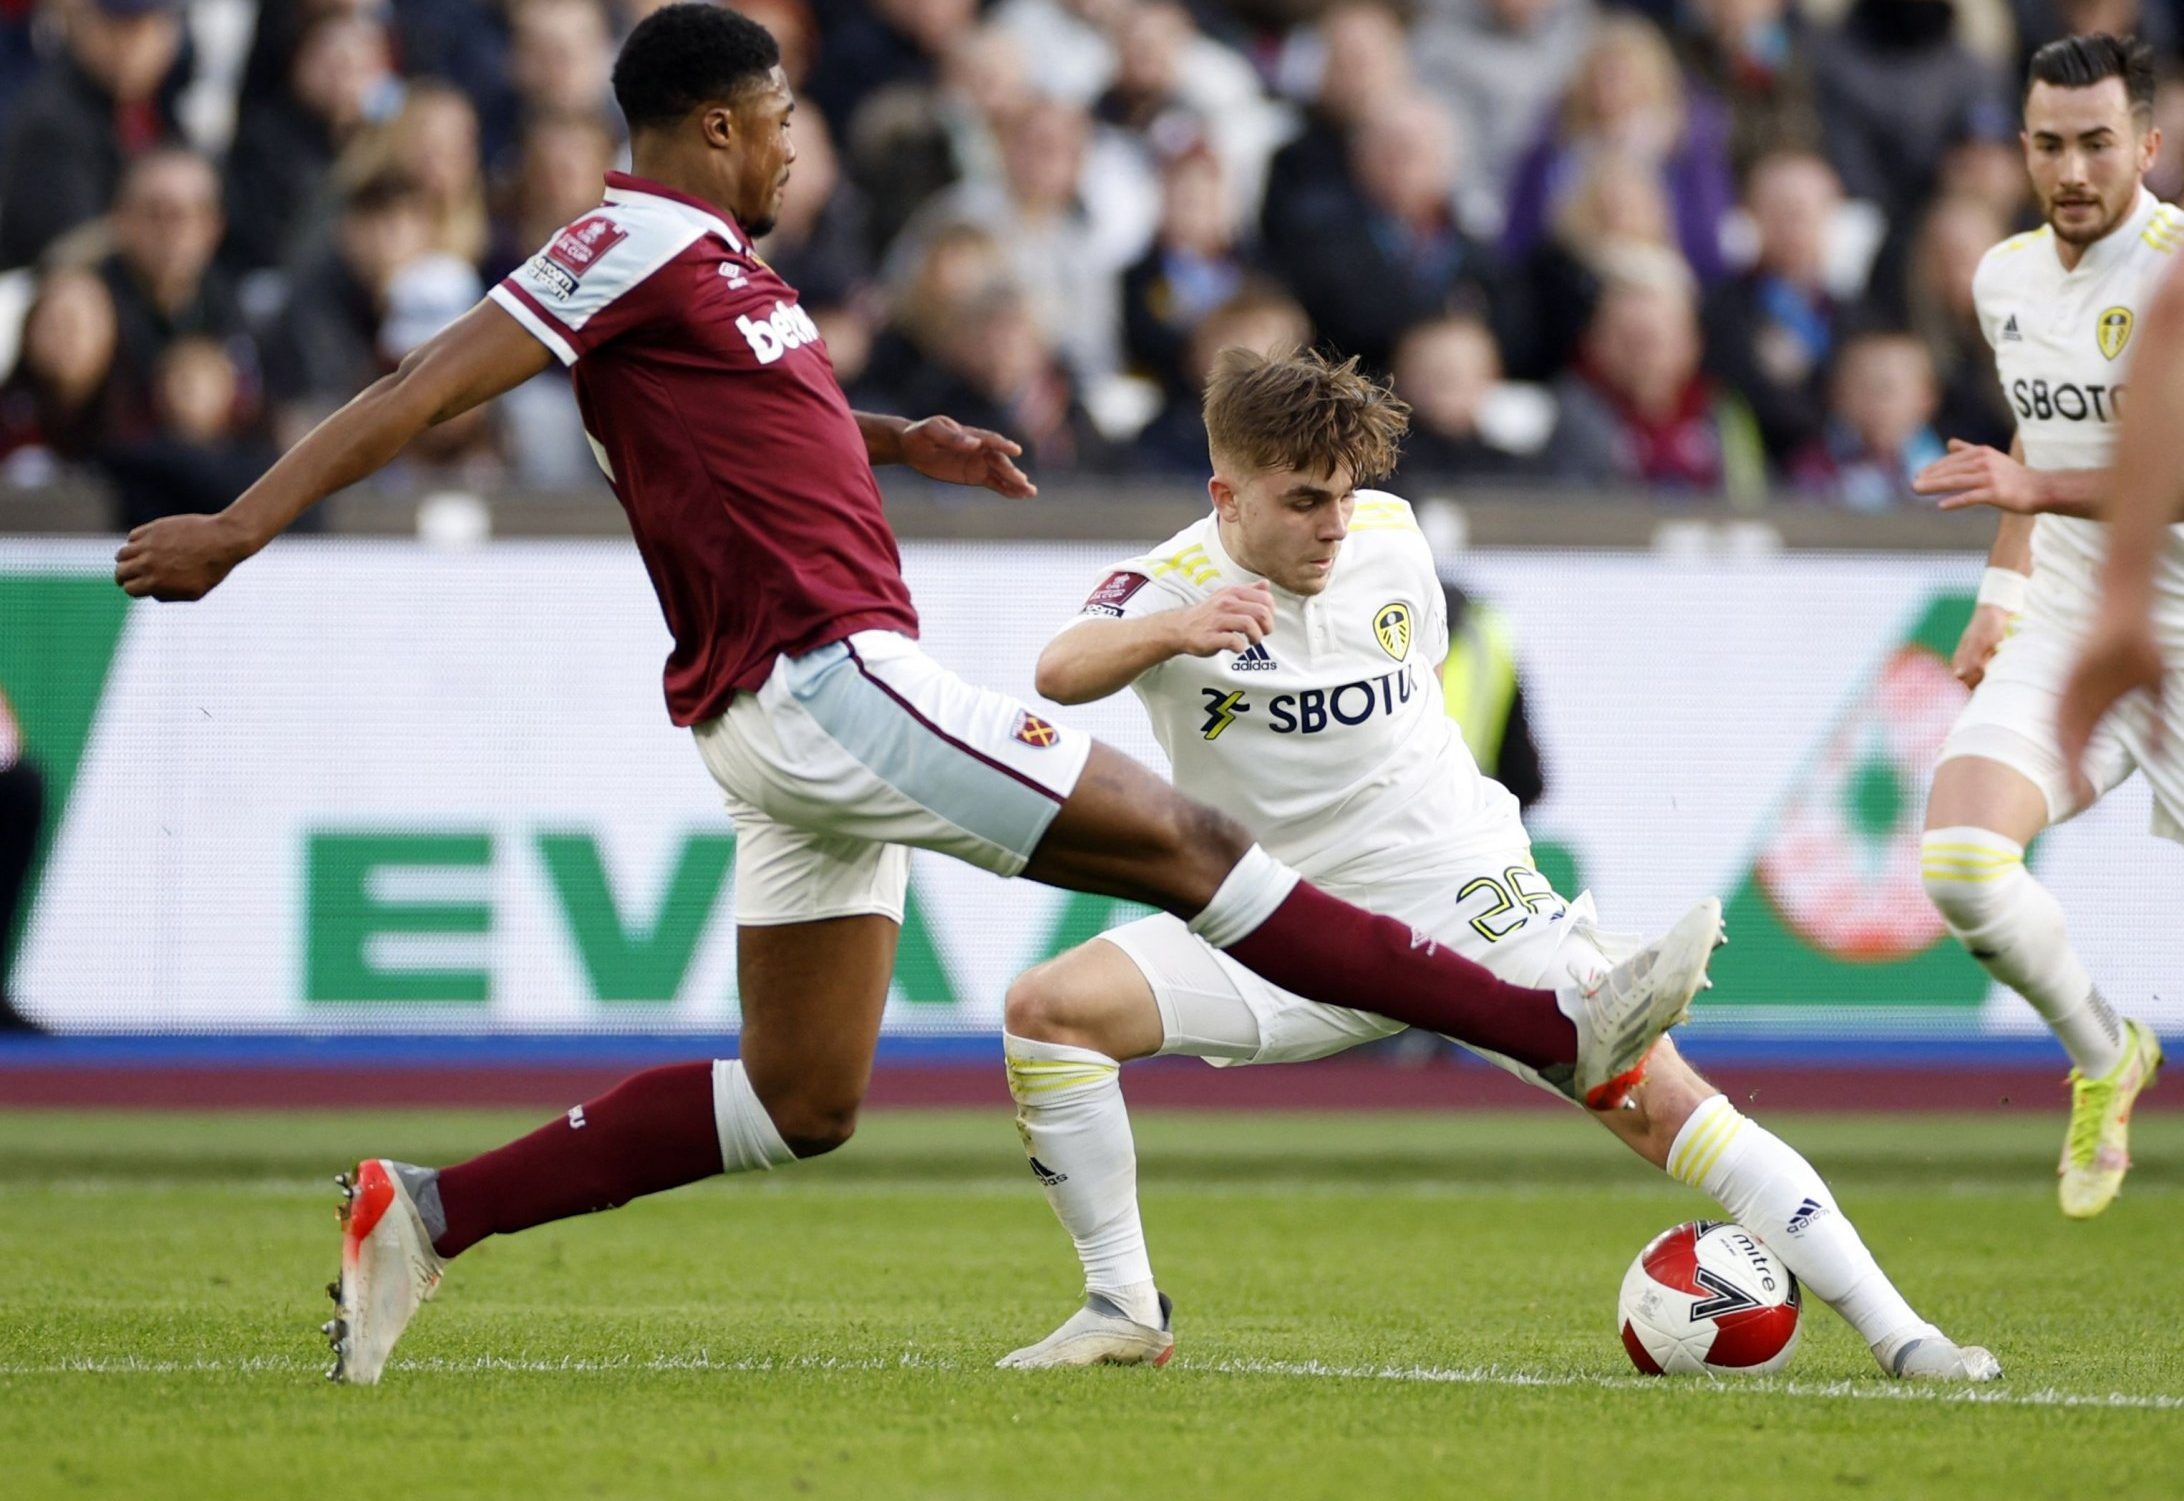 Leeds United midfielder Lewis Bate in action against West Ham in the FA Cup